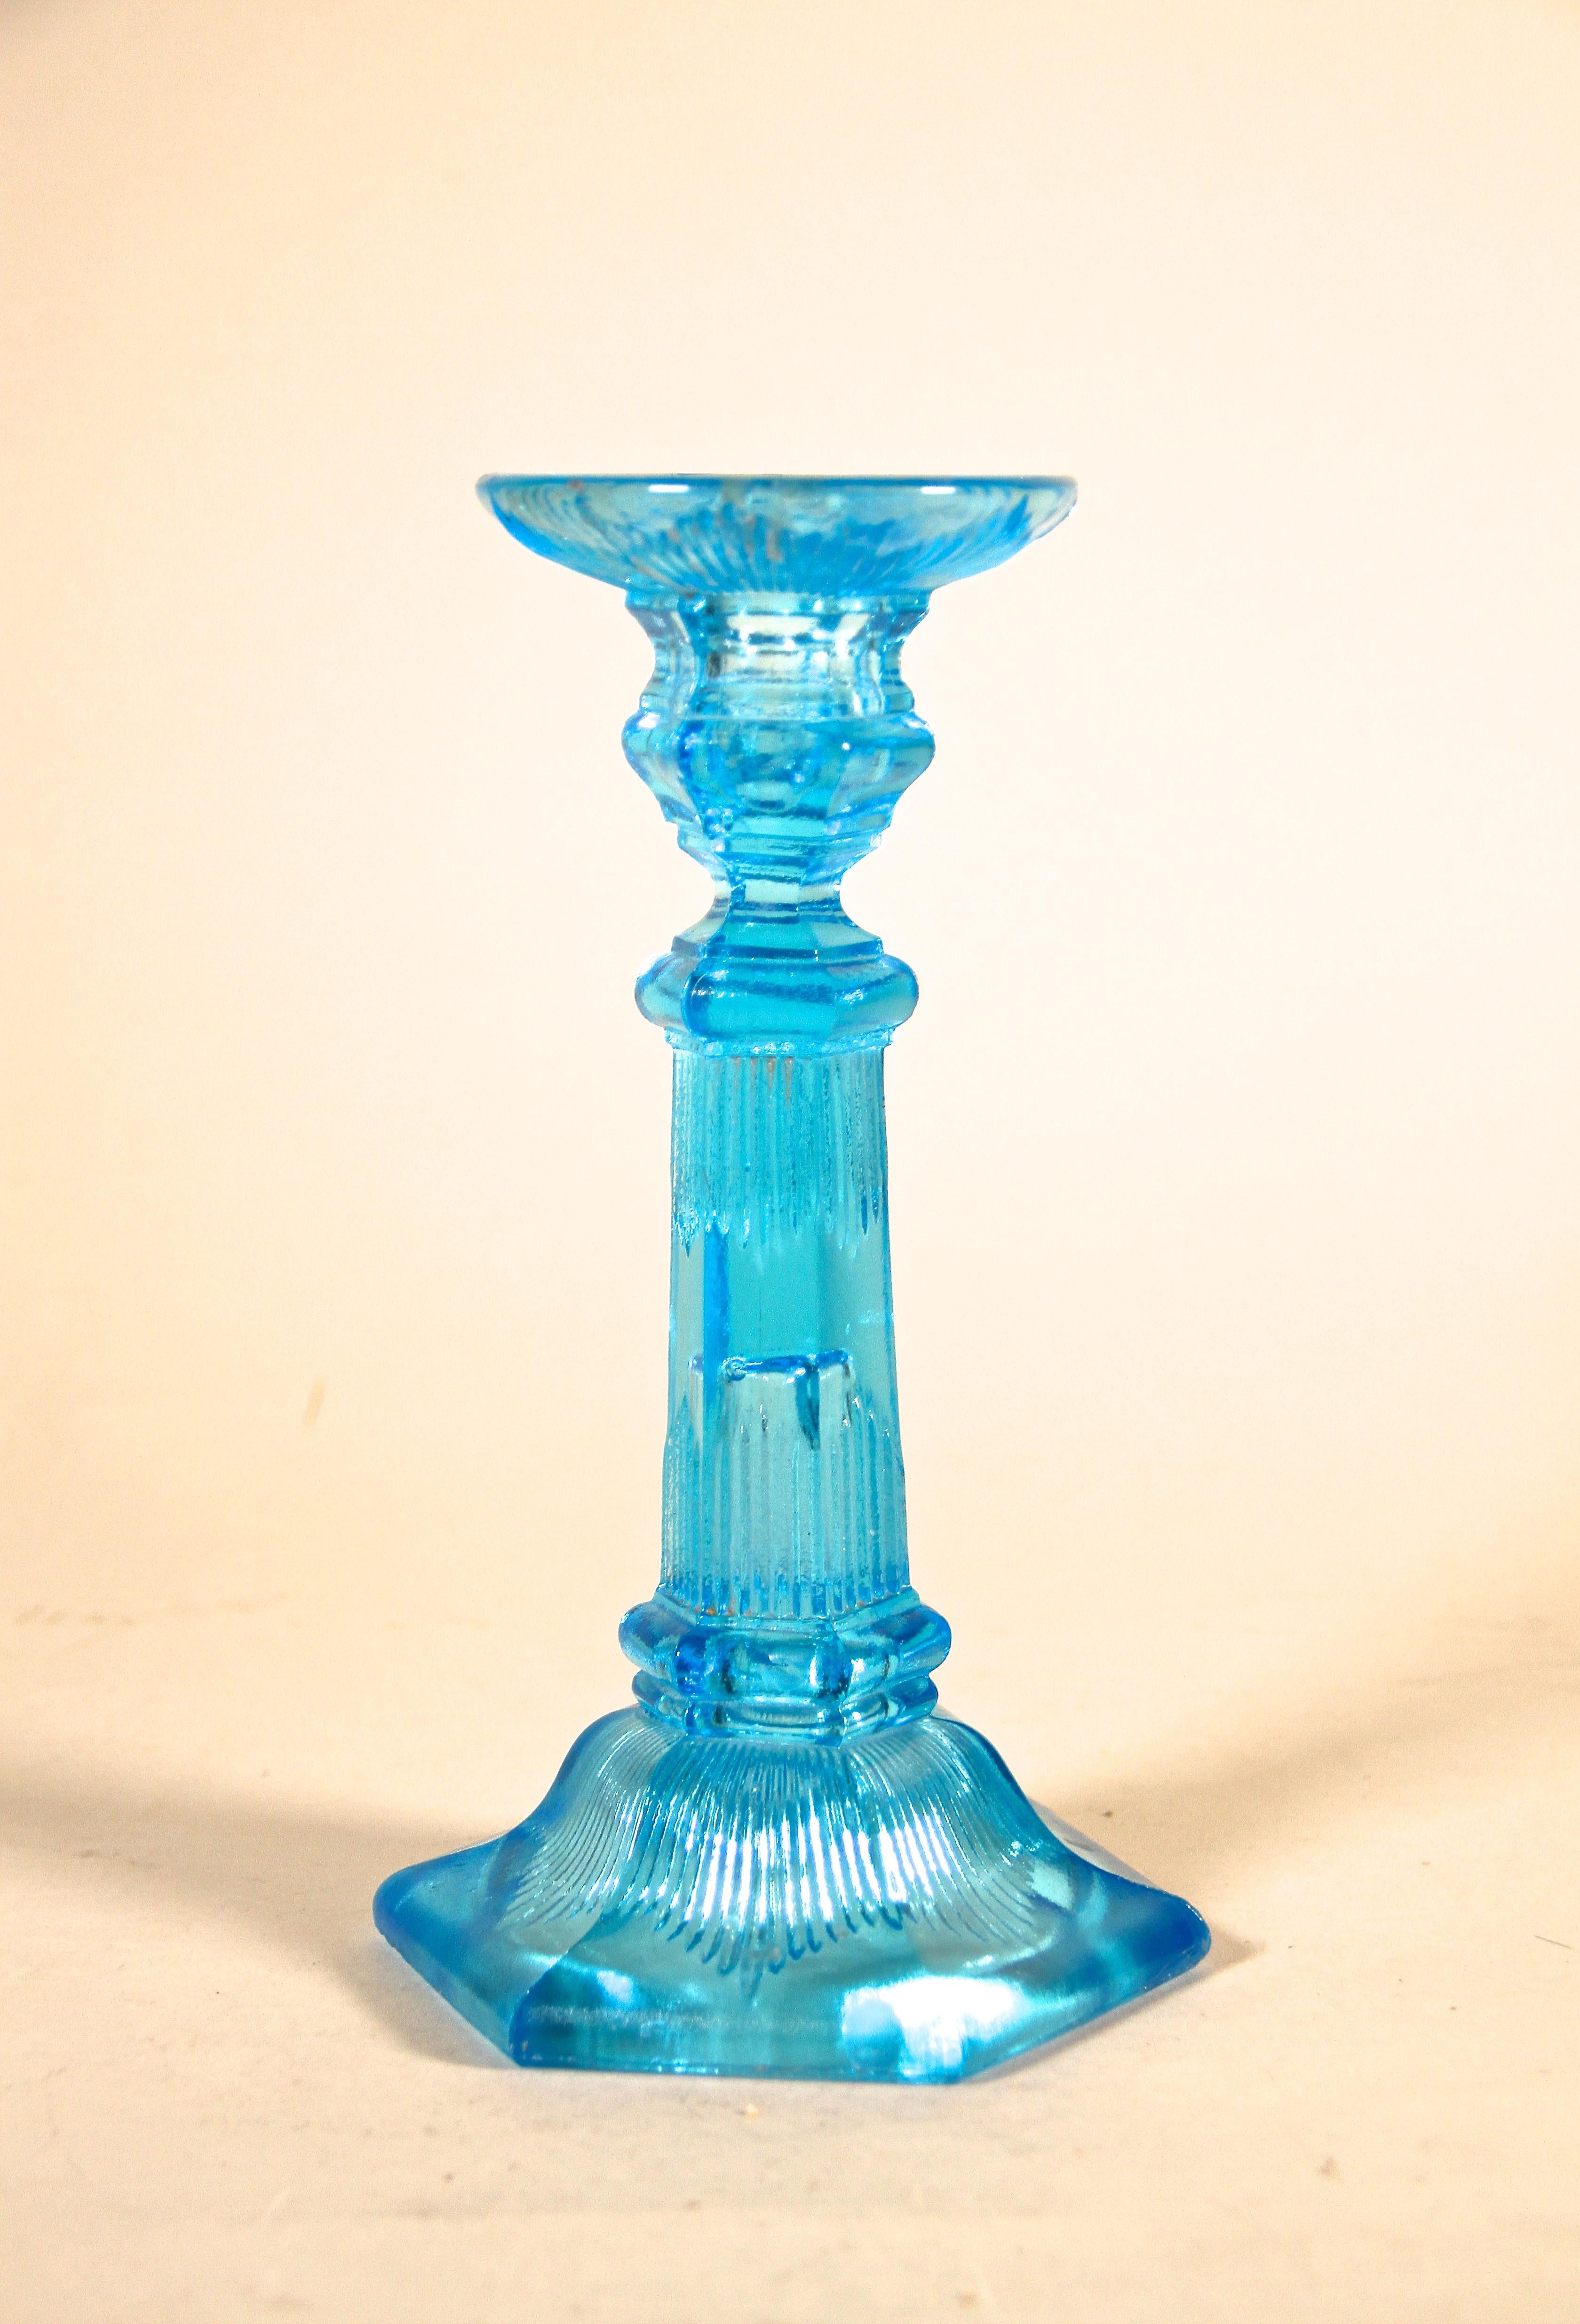 Decorative blue glass candlestick from the Art Deco period in Austria around 1920. Beautifully made of pressed blue colored glass, this candlestick shows a great design. A lovely decoration piece for a table or a sideboard from the early 20th